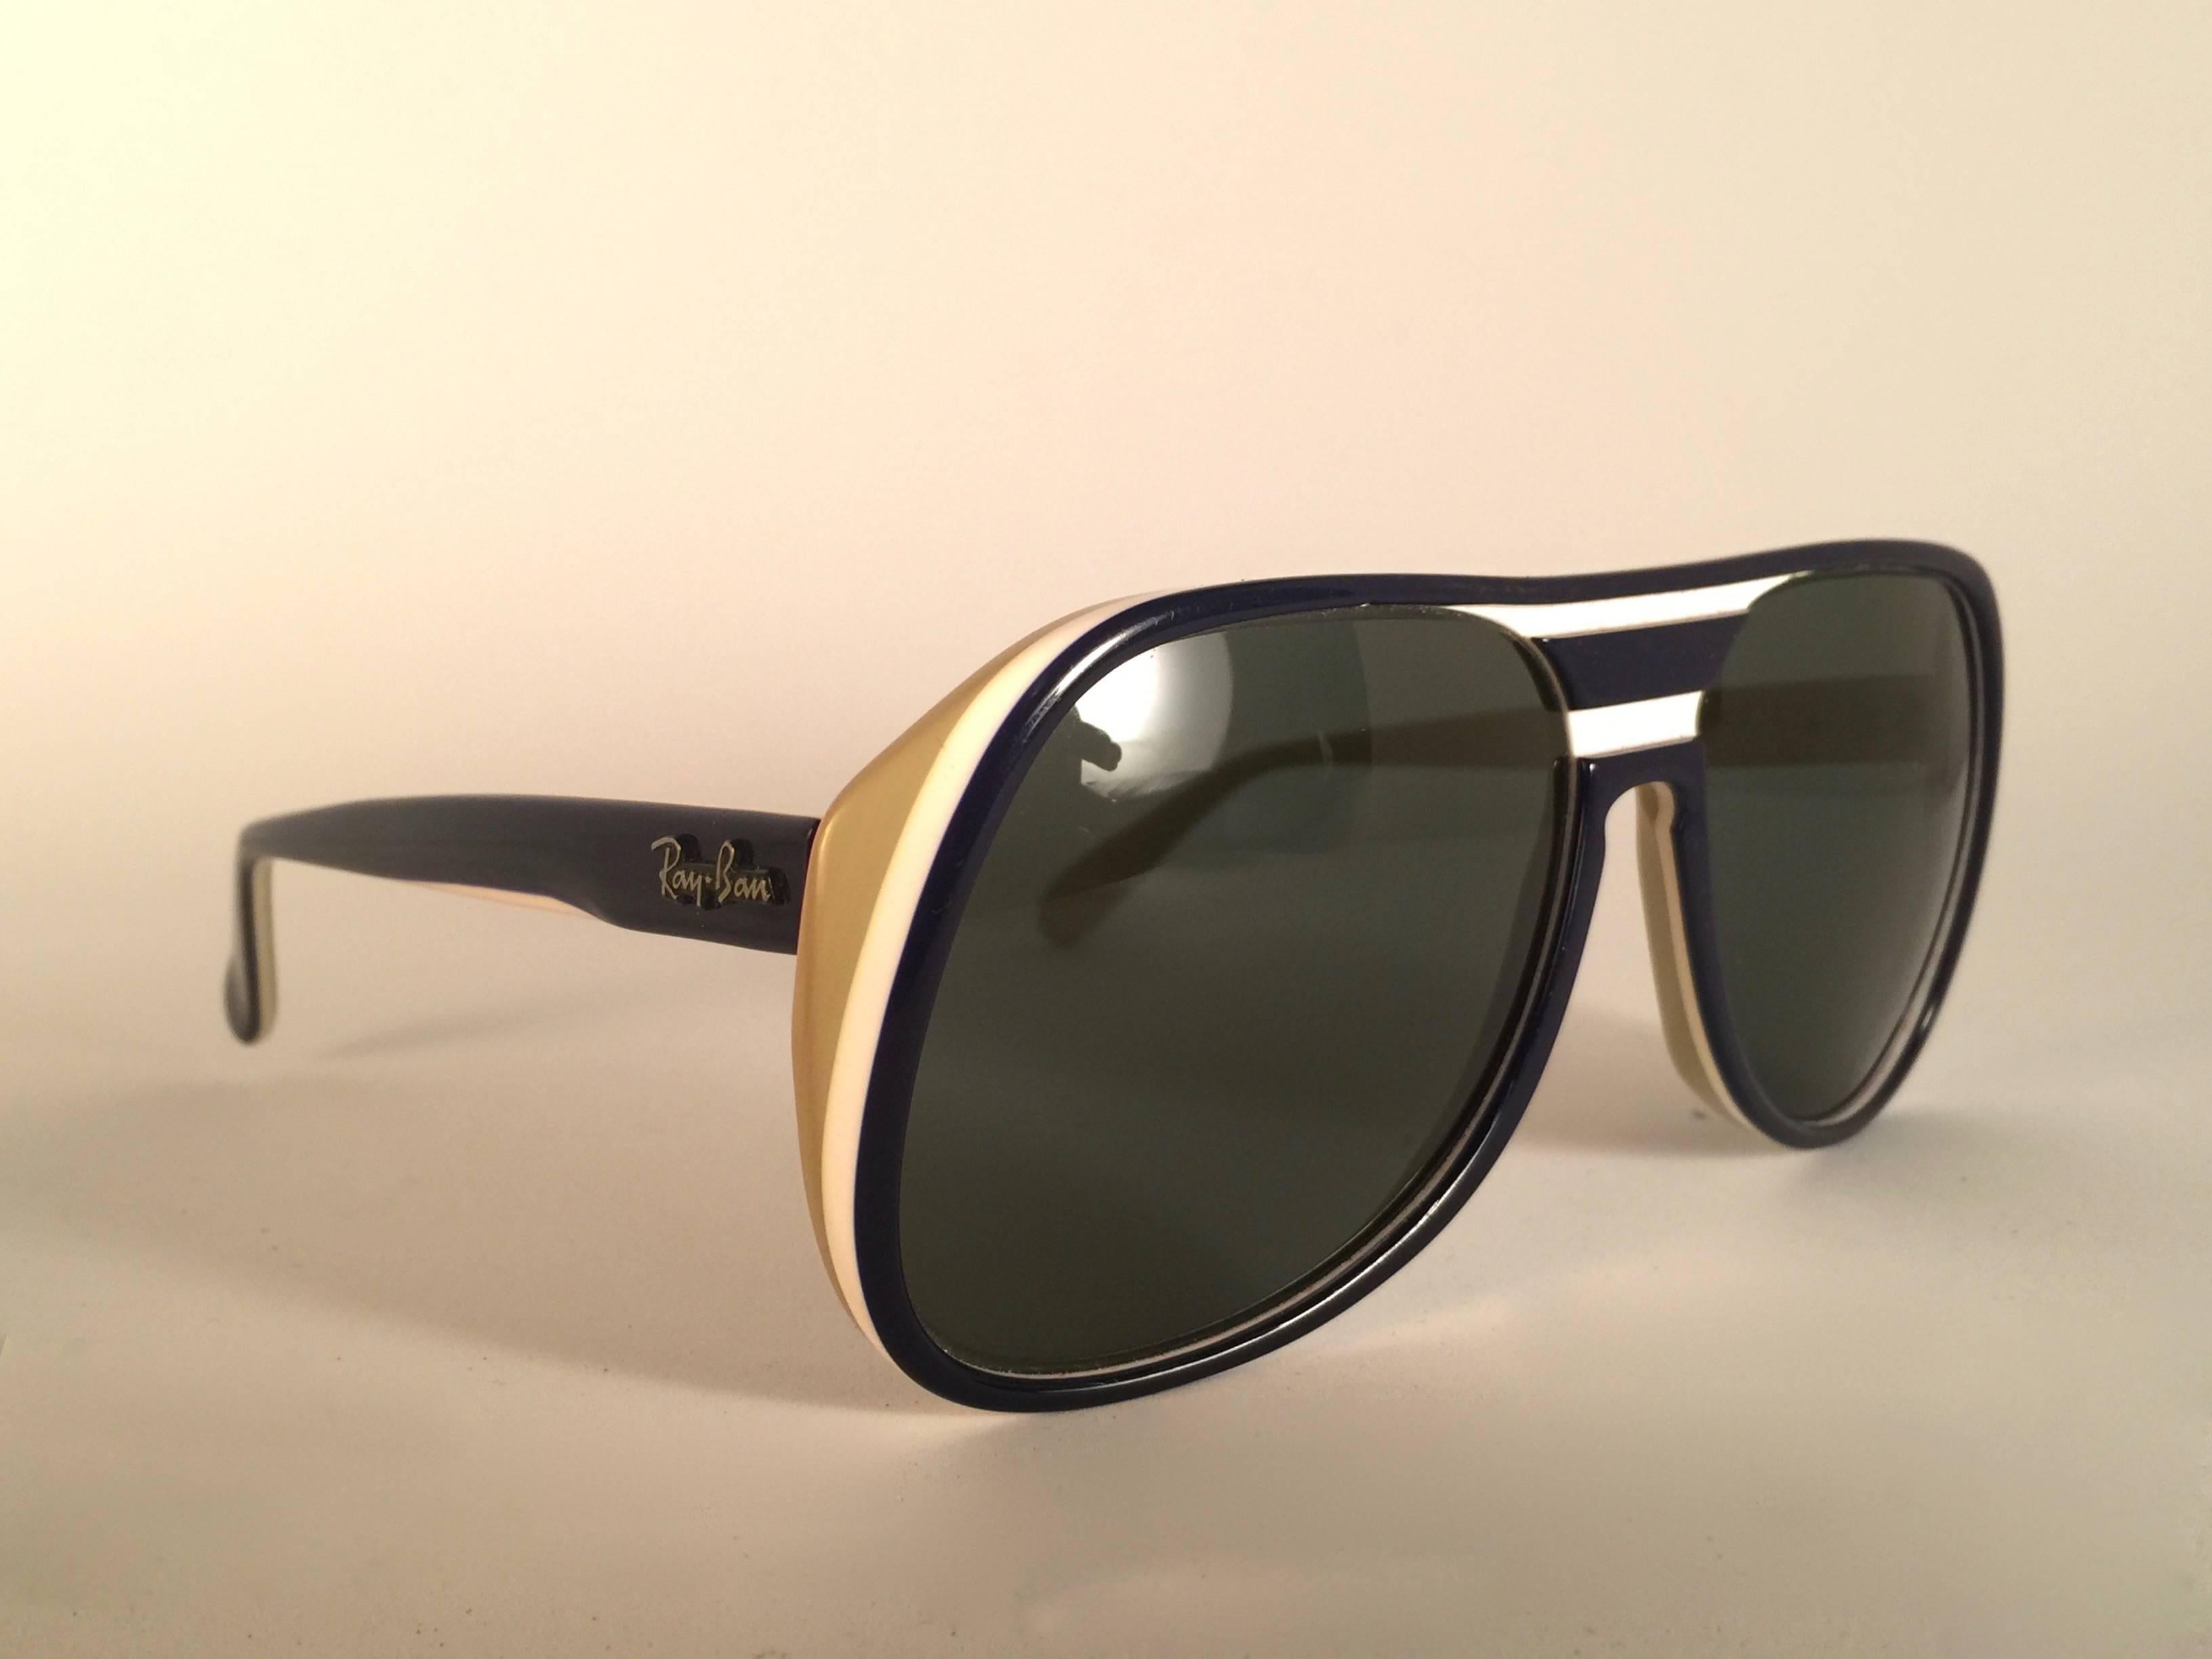 Mint Ray Ban Timberline in  combination.   

This pair have minor sign of wear on lenses and frame due to nearly 40 years of storage.   

Designed and Produced in USA.

FRONT : 14.5 CMS

LENS HEIGHT : 5 CMS

LENS WIDTH : 5.6 CMS

TEMPLES : 13. 5 CMS